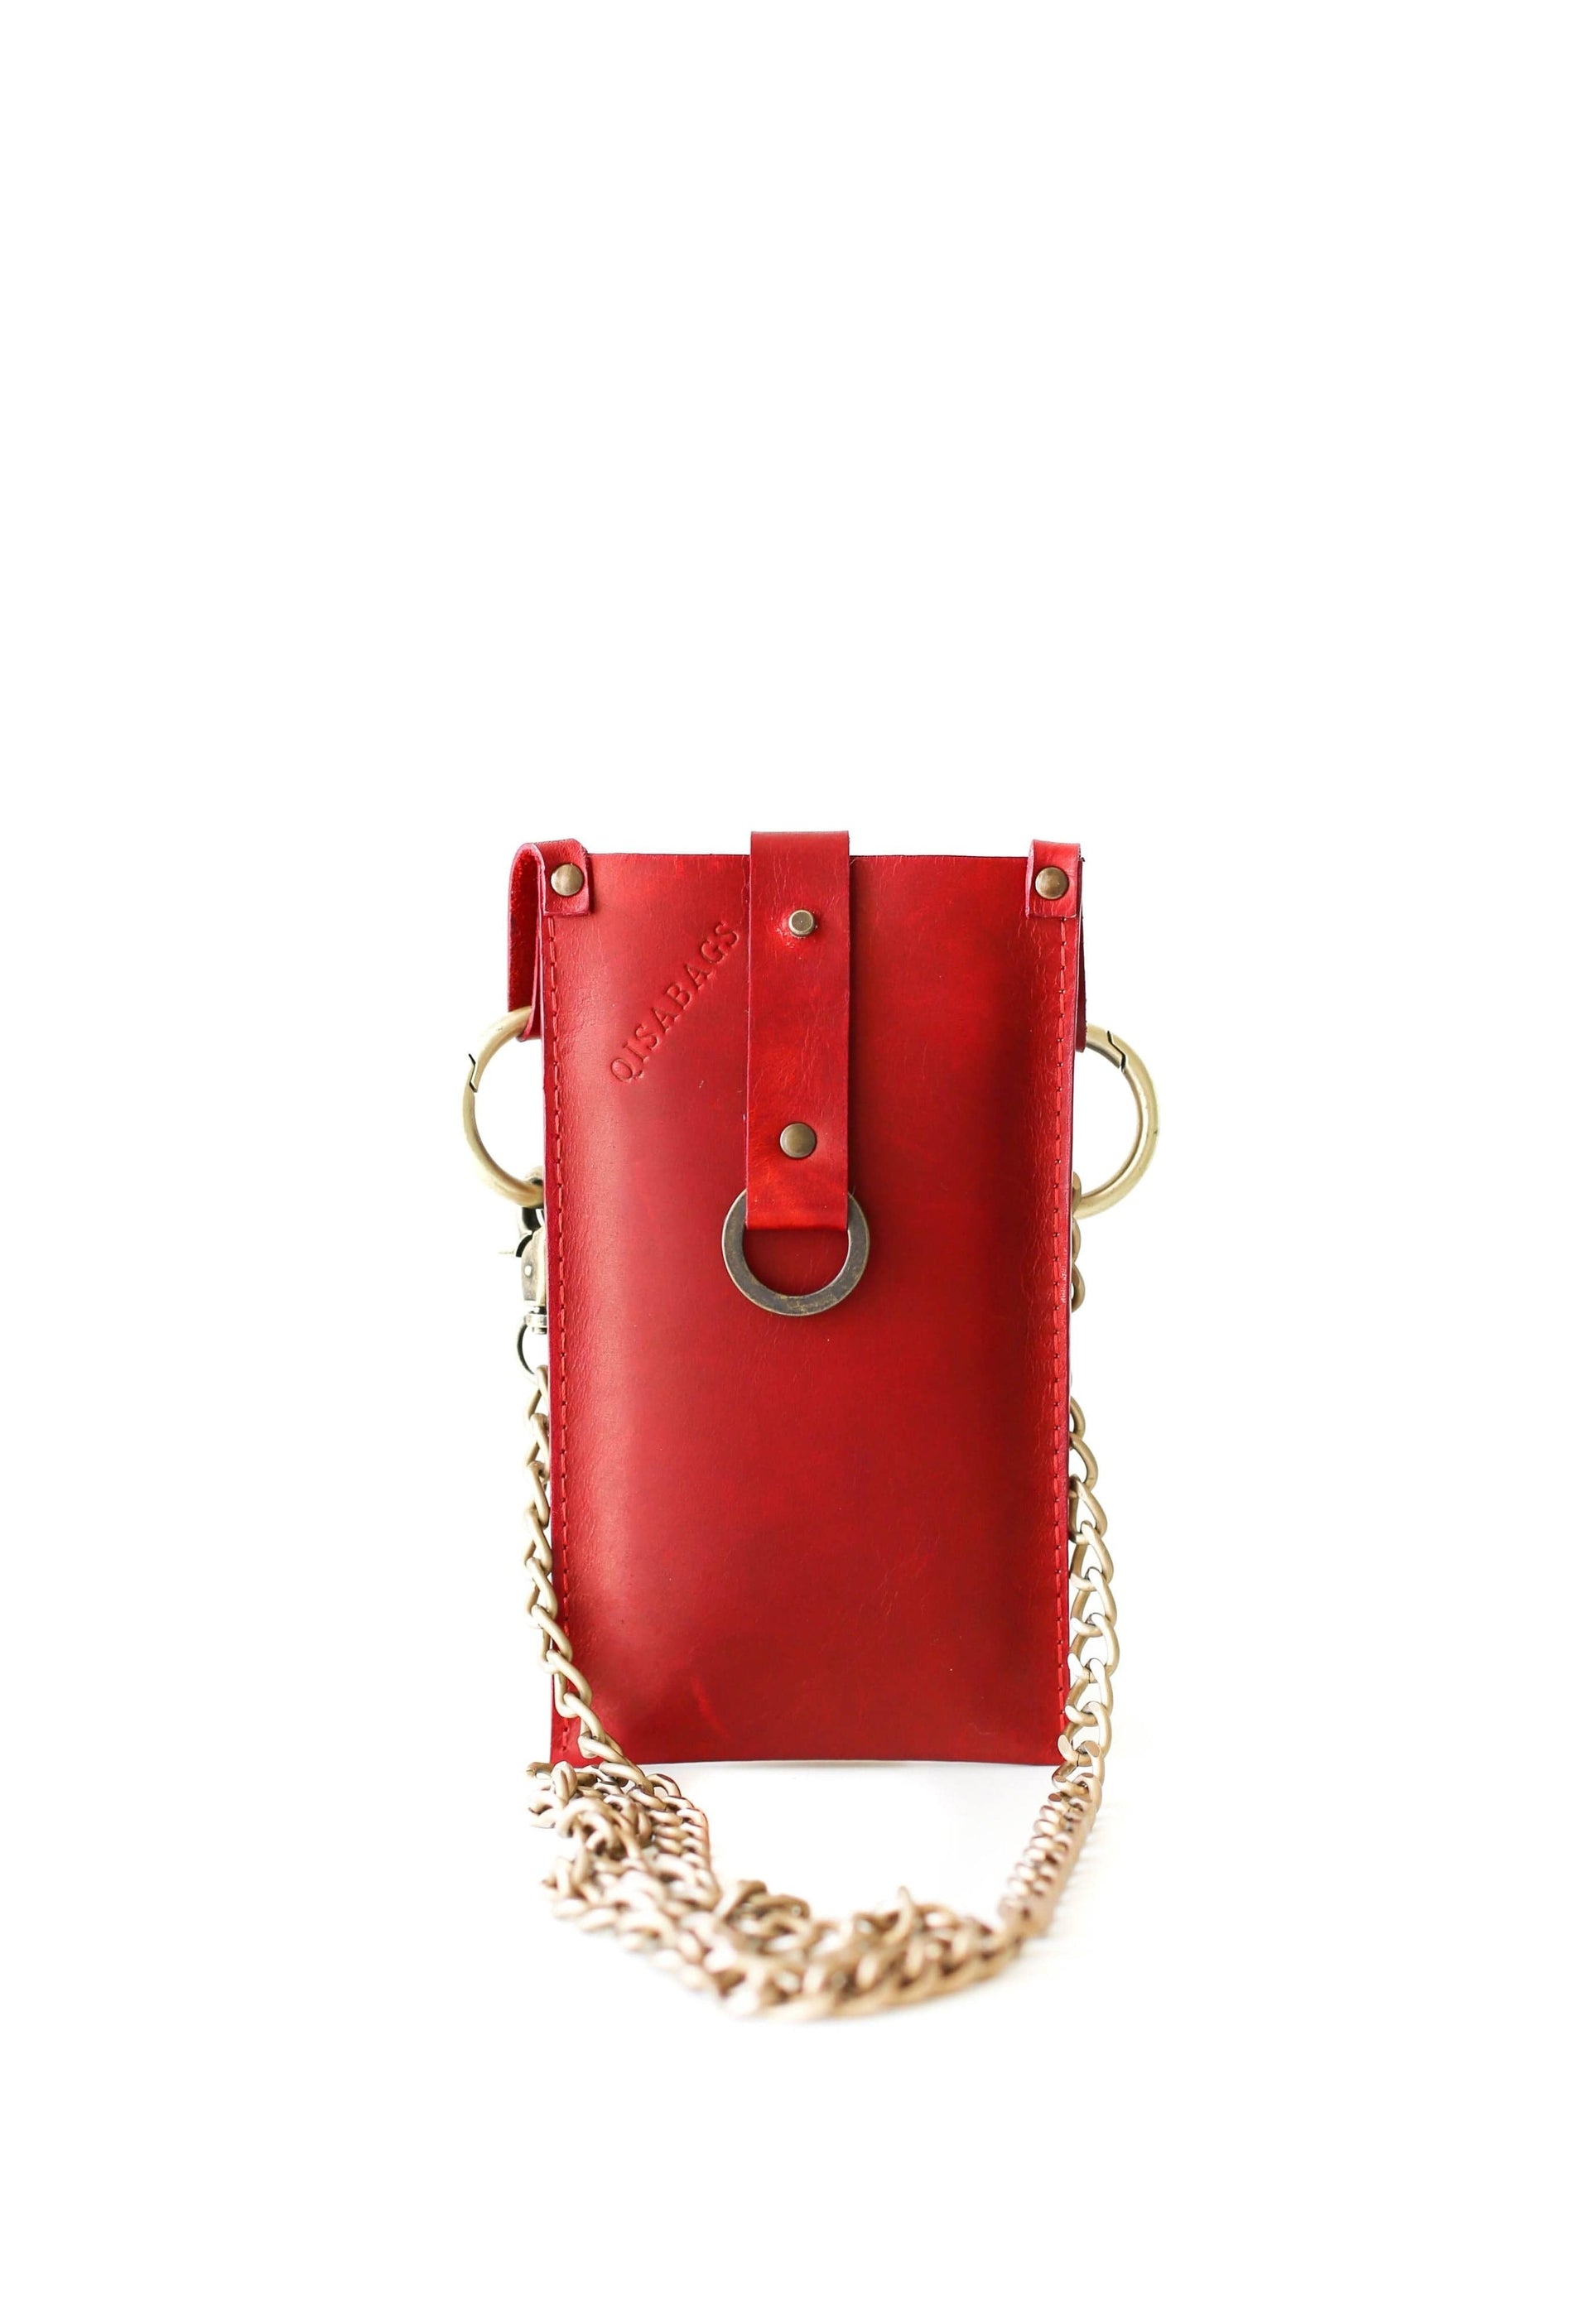 Red leather bag for phone